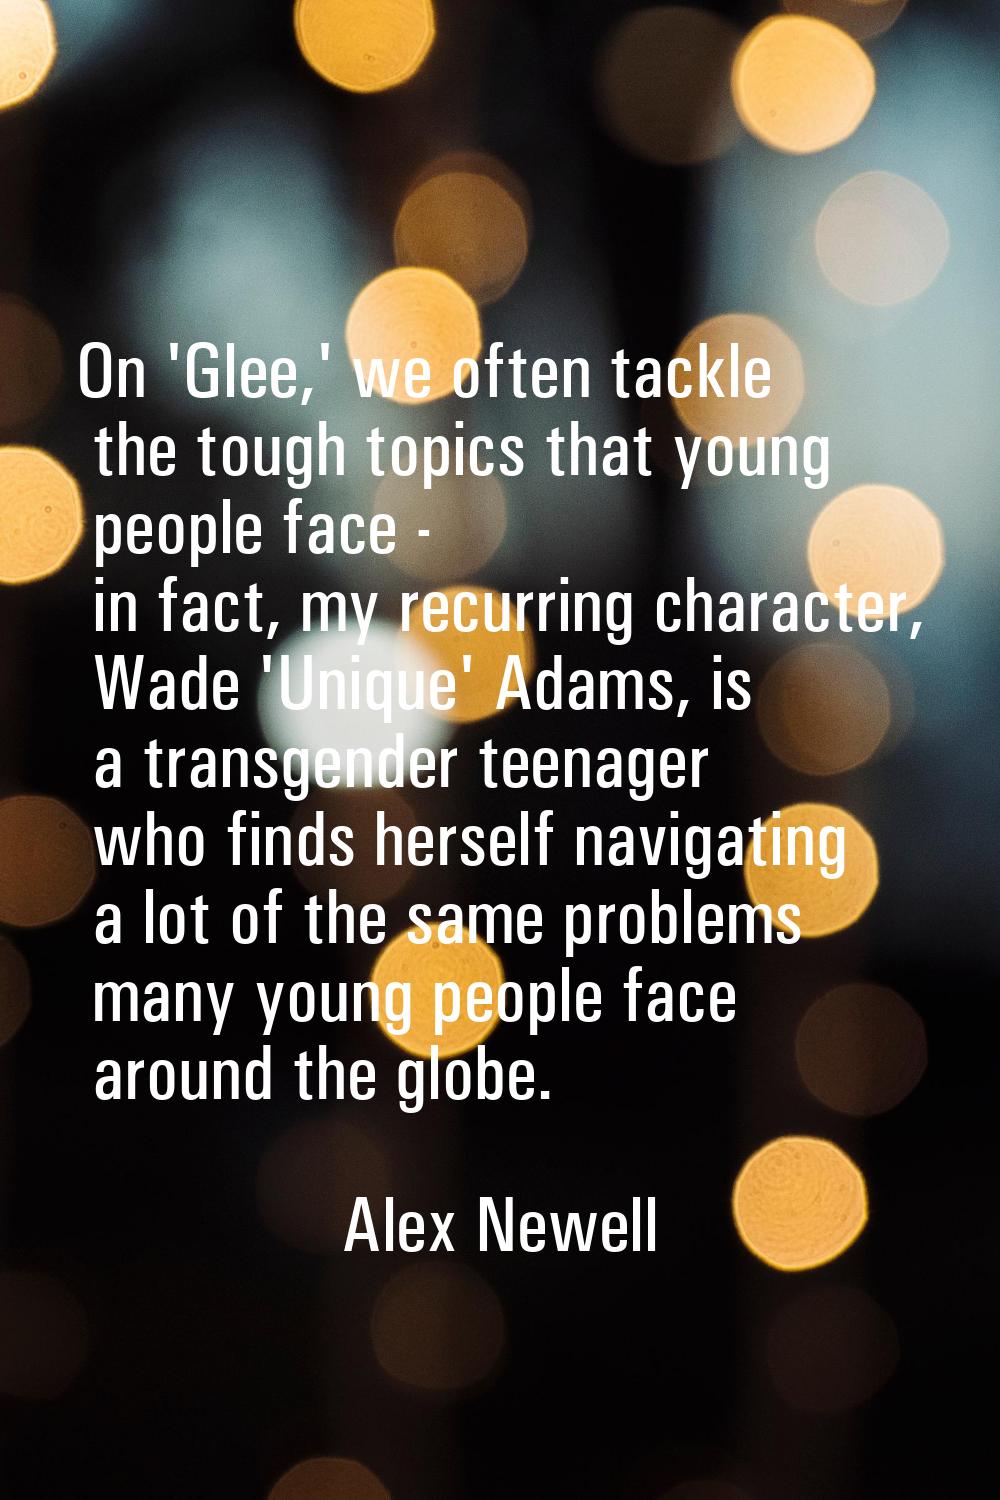 On 'Glee,' we often tackle the tough topics that young people face - in fact, my recurring characte